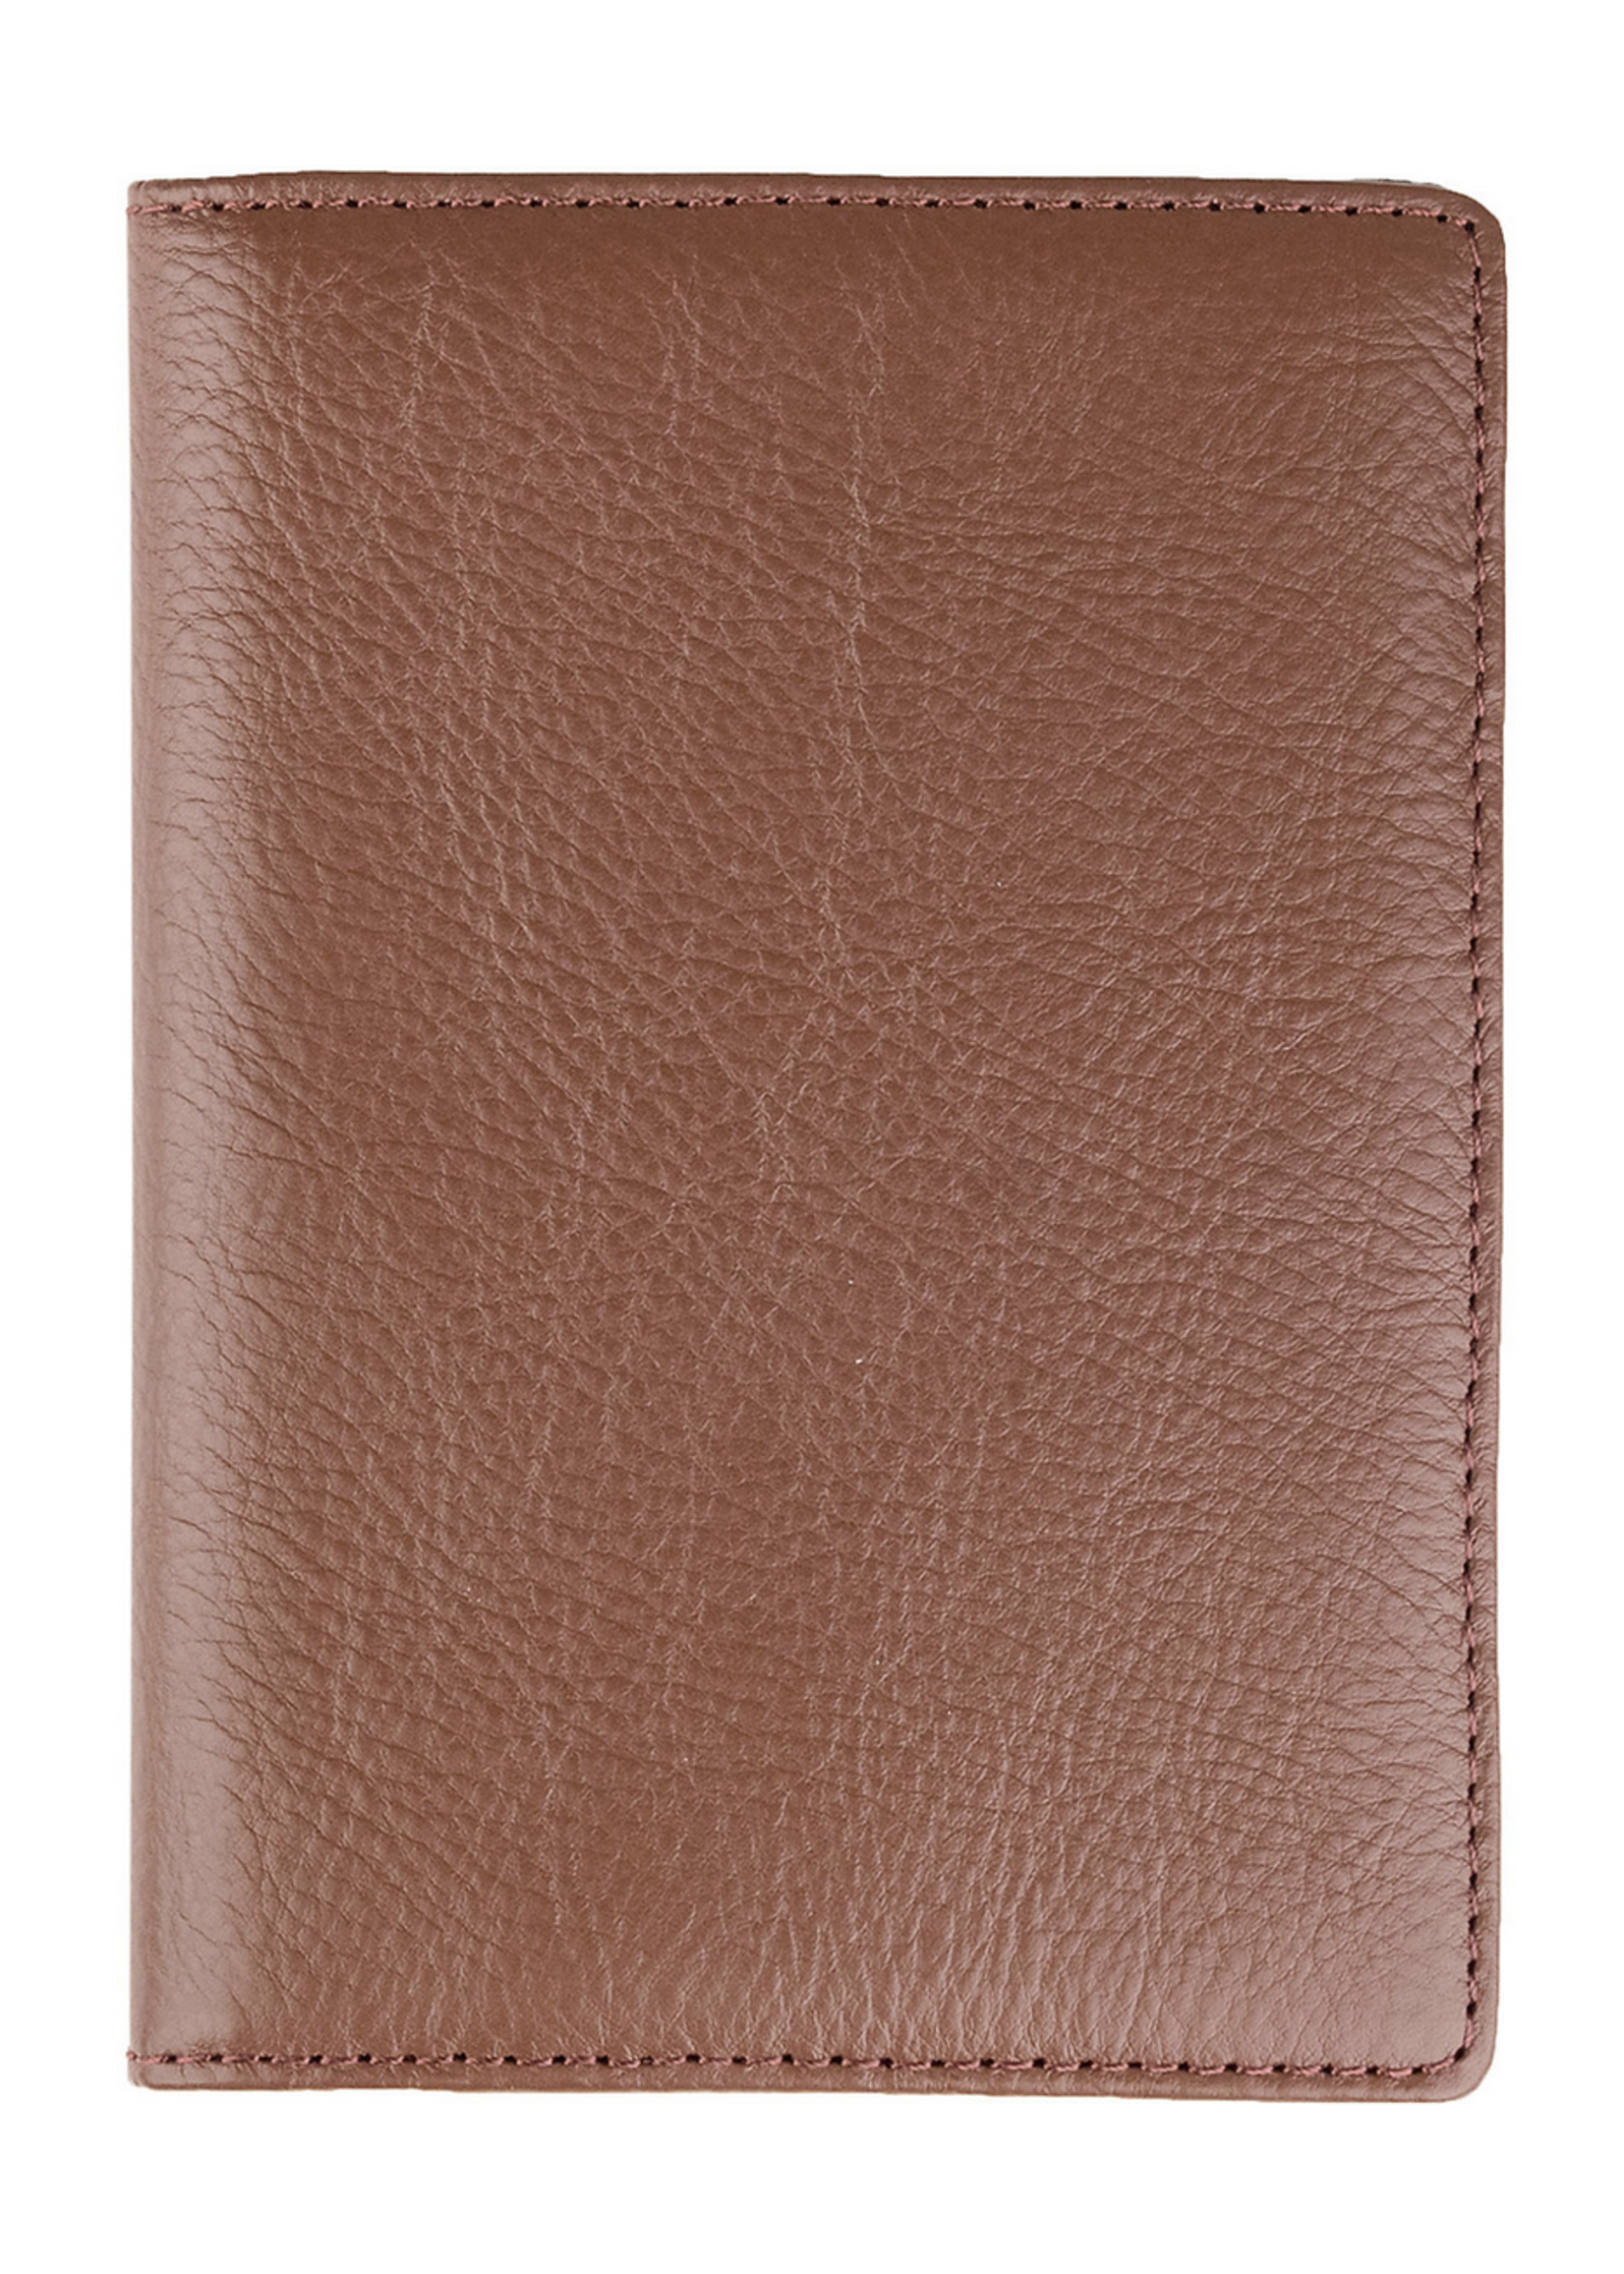 Boulevard Tommy Leather Passport Cover